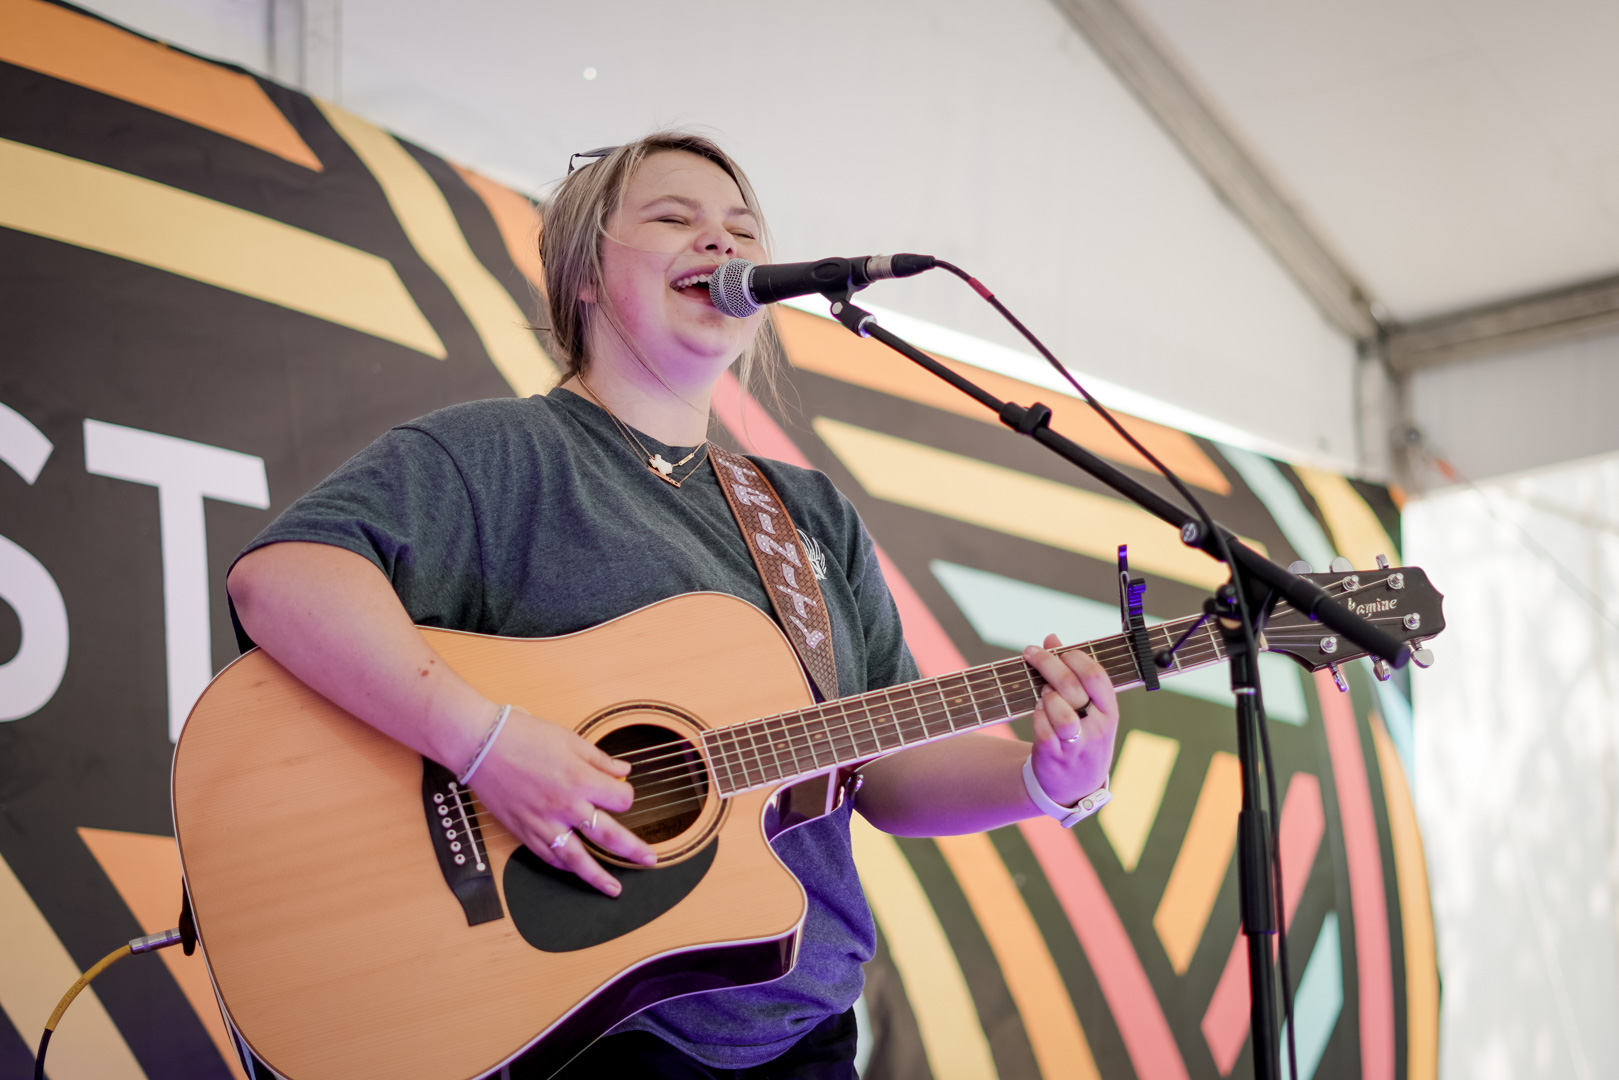 A young woman plays acoustic guitaron stage